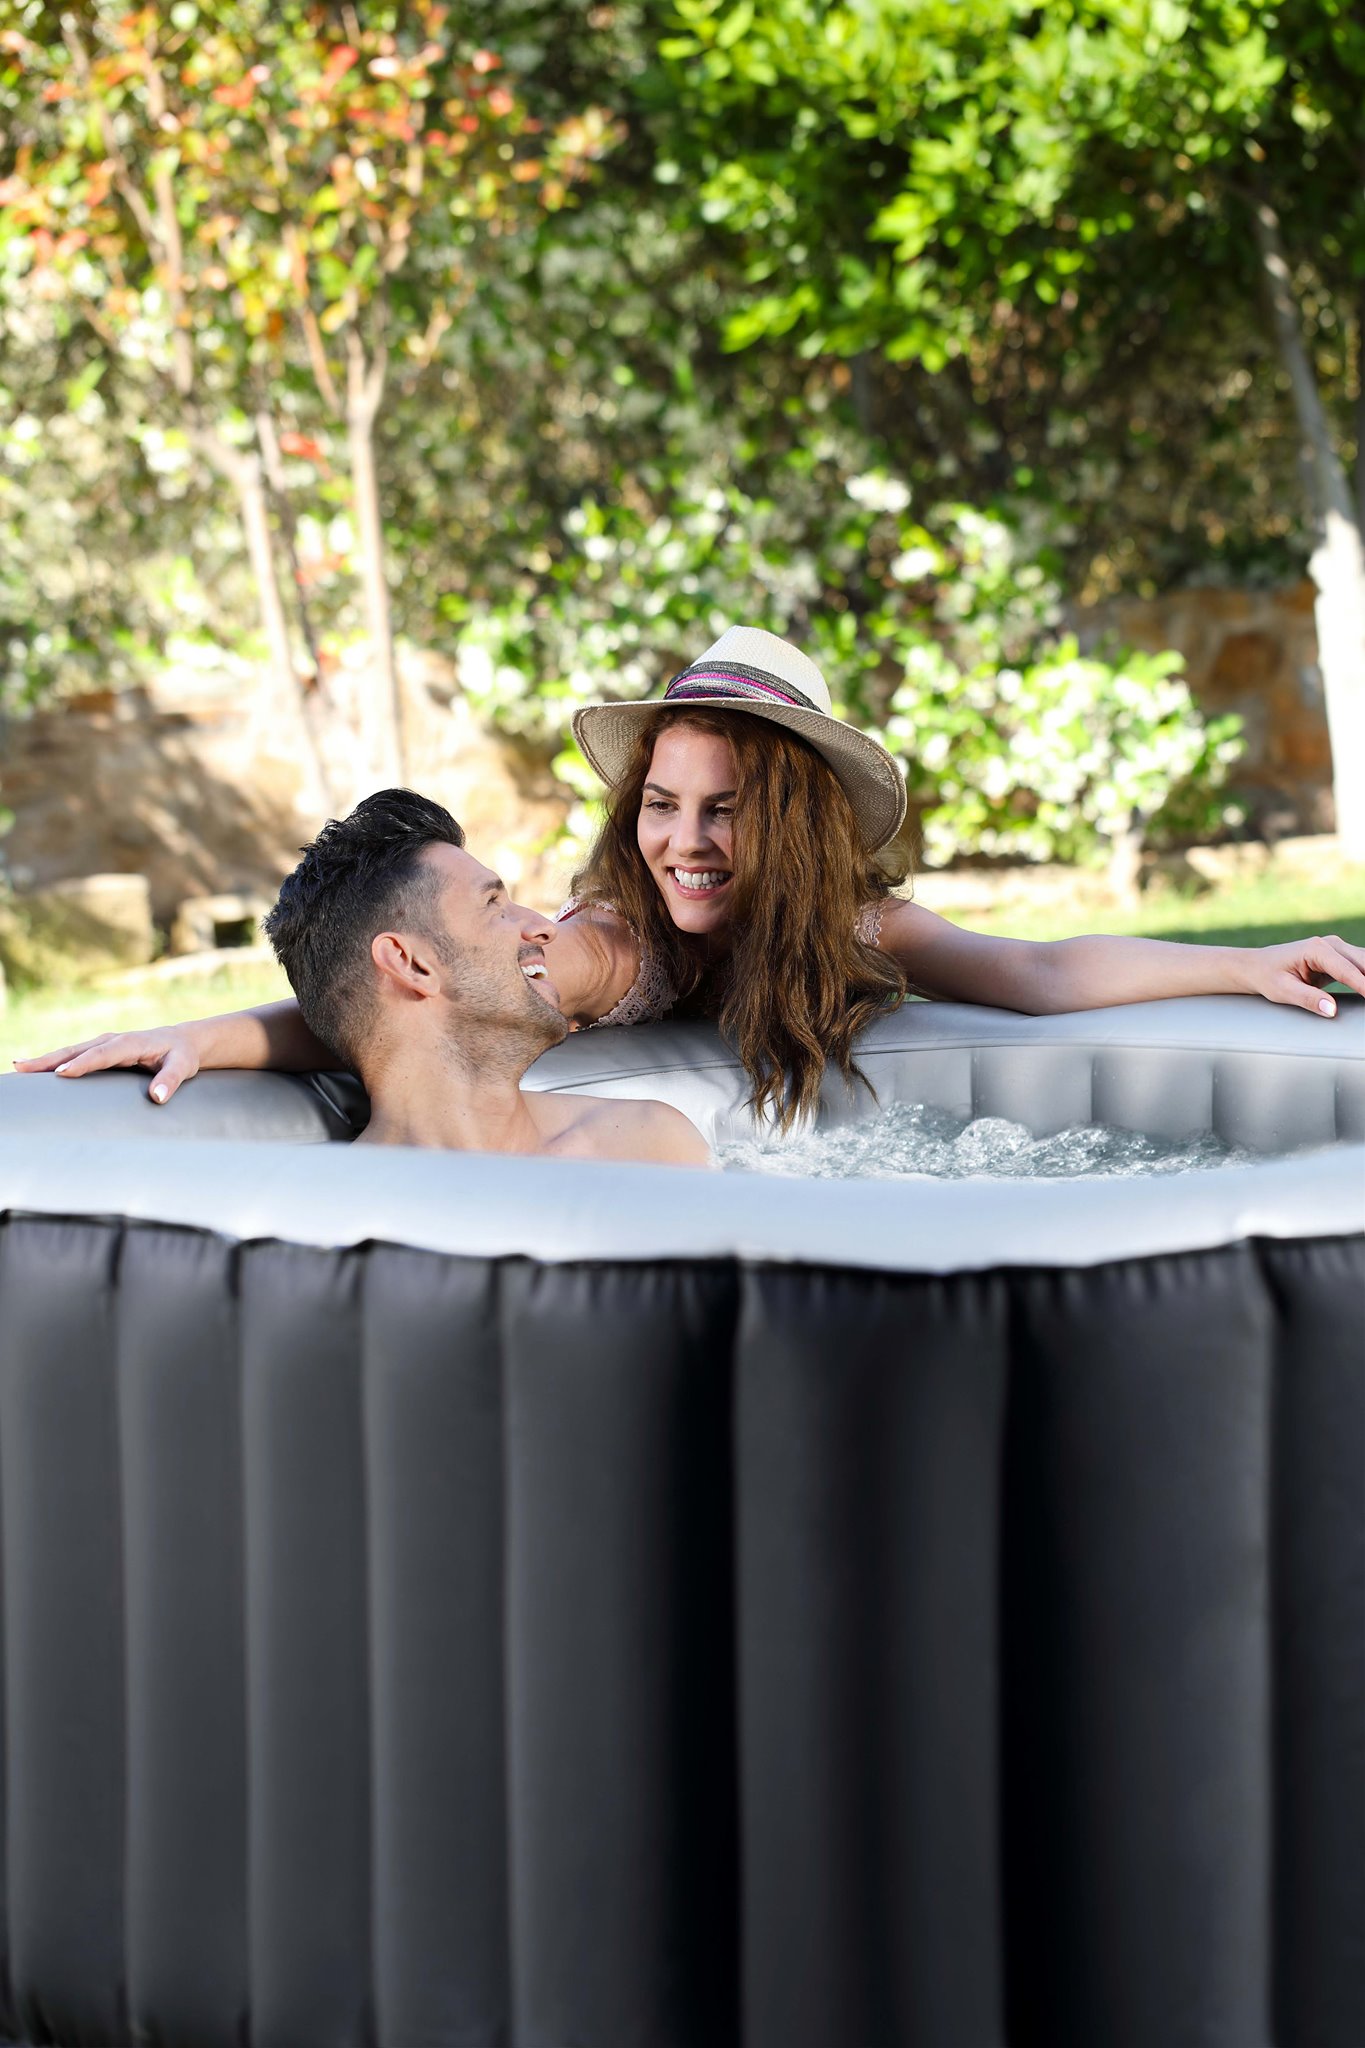 MSpa Delight Series Alpine spa
 Flip open the hot tub cover, start the jets and watch how everyone in the family tends t... » Outdoor Furniture Fuengirola, Costa Del Sol, Spain